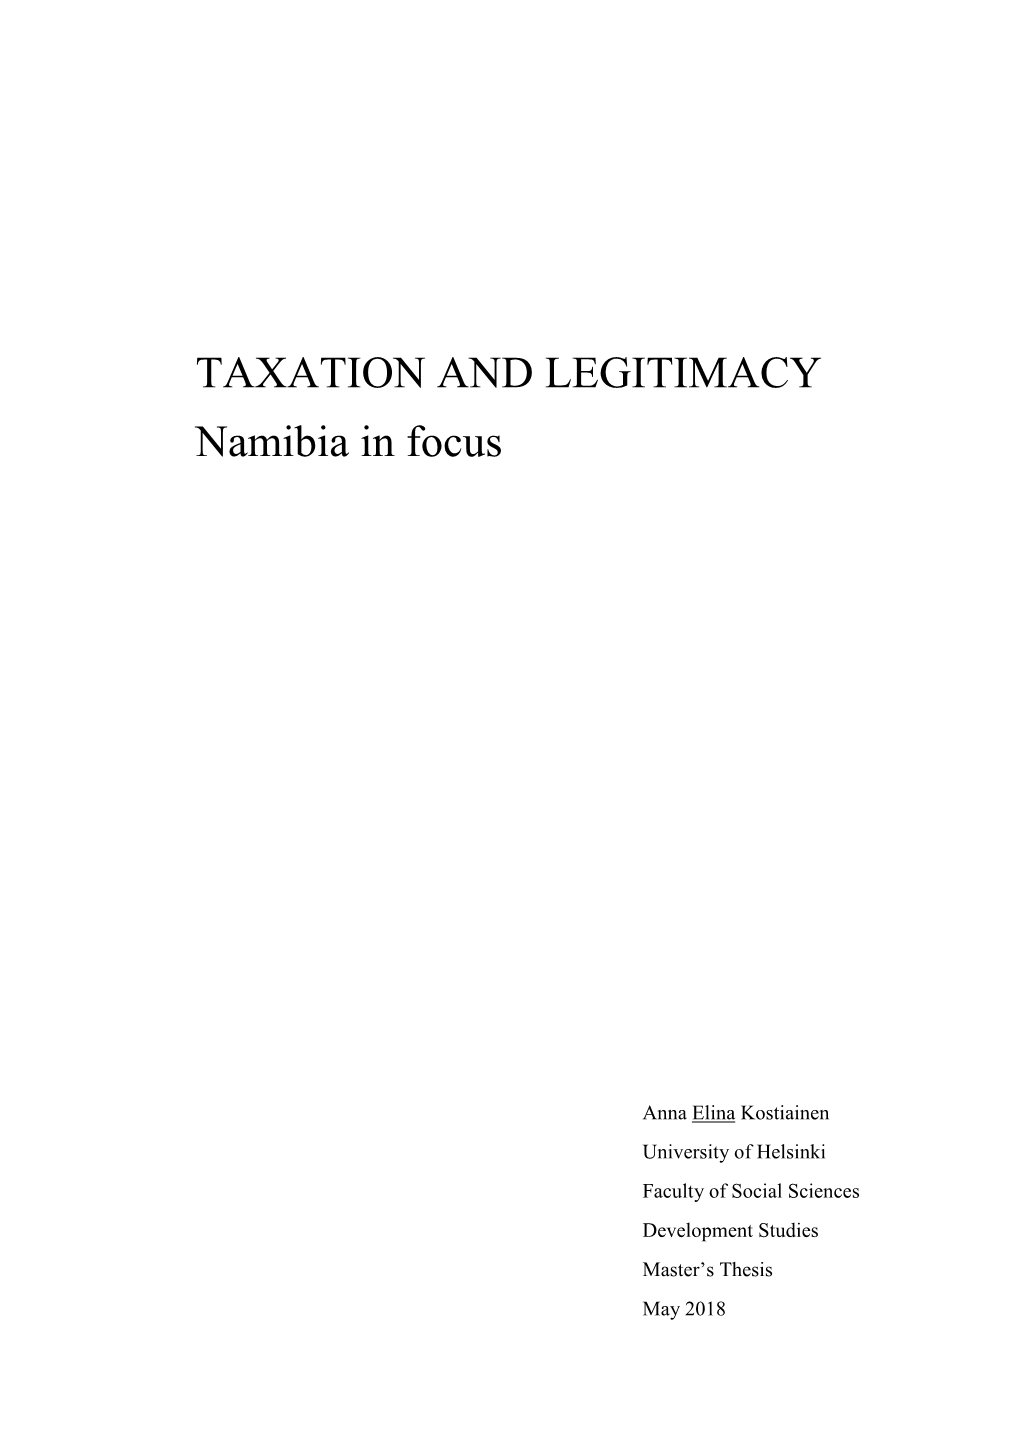 TAXATION and LEGITIMACY Namibia in Focus